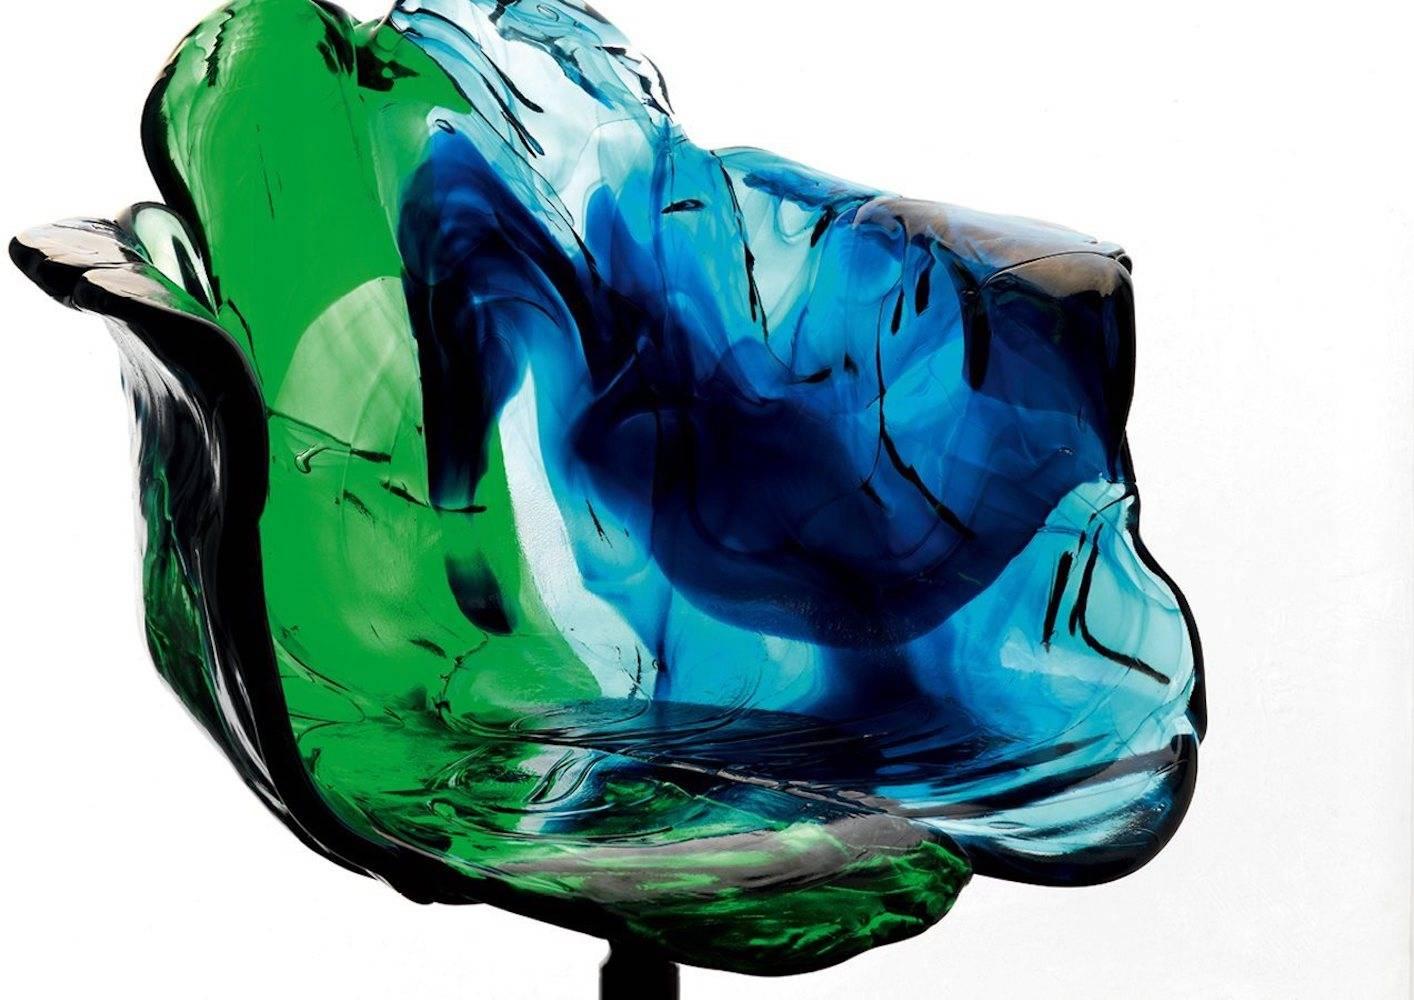 Armchair with armrests in polycarbonate, entirely handmade. The petals, in transparent and soft colors, mix green and blue. Wonderful play of colors modelled by hand in a transparent material. It is supported by a semi-gloss black pedestal, which